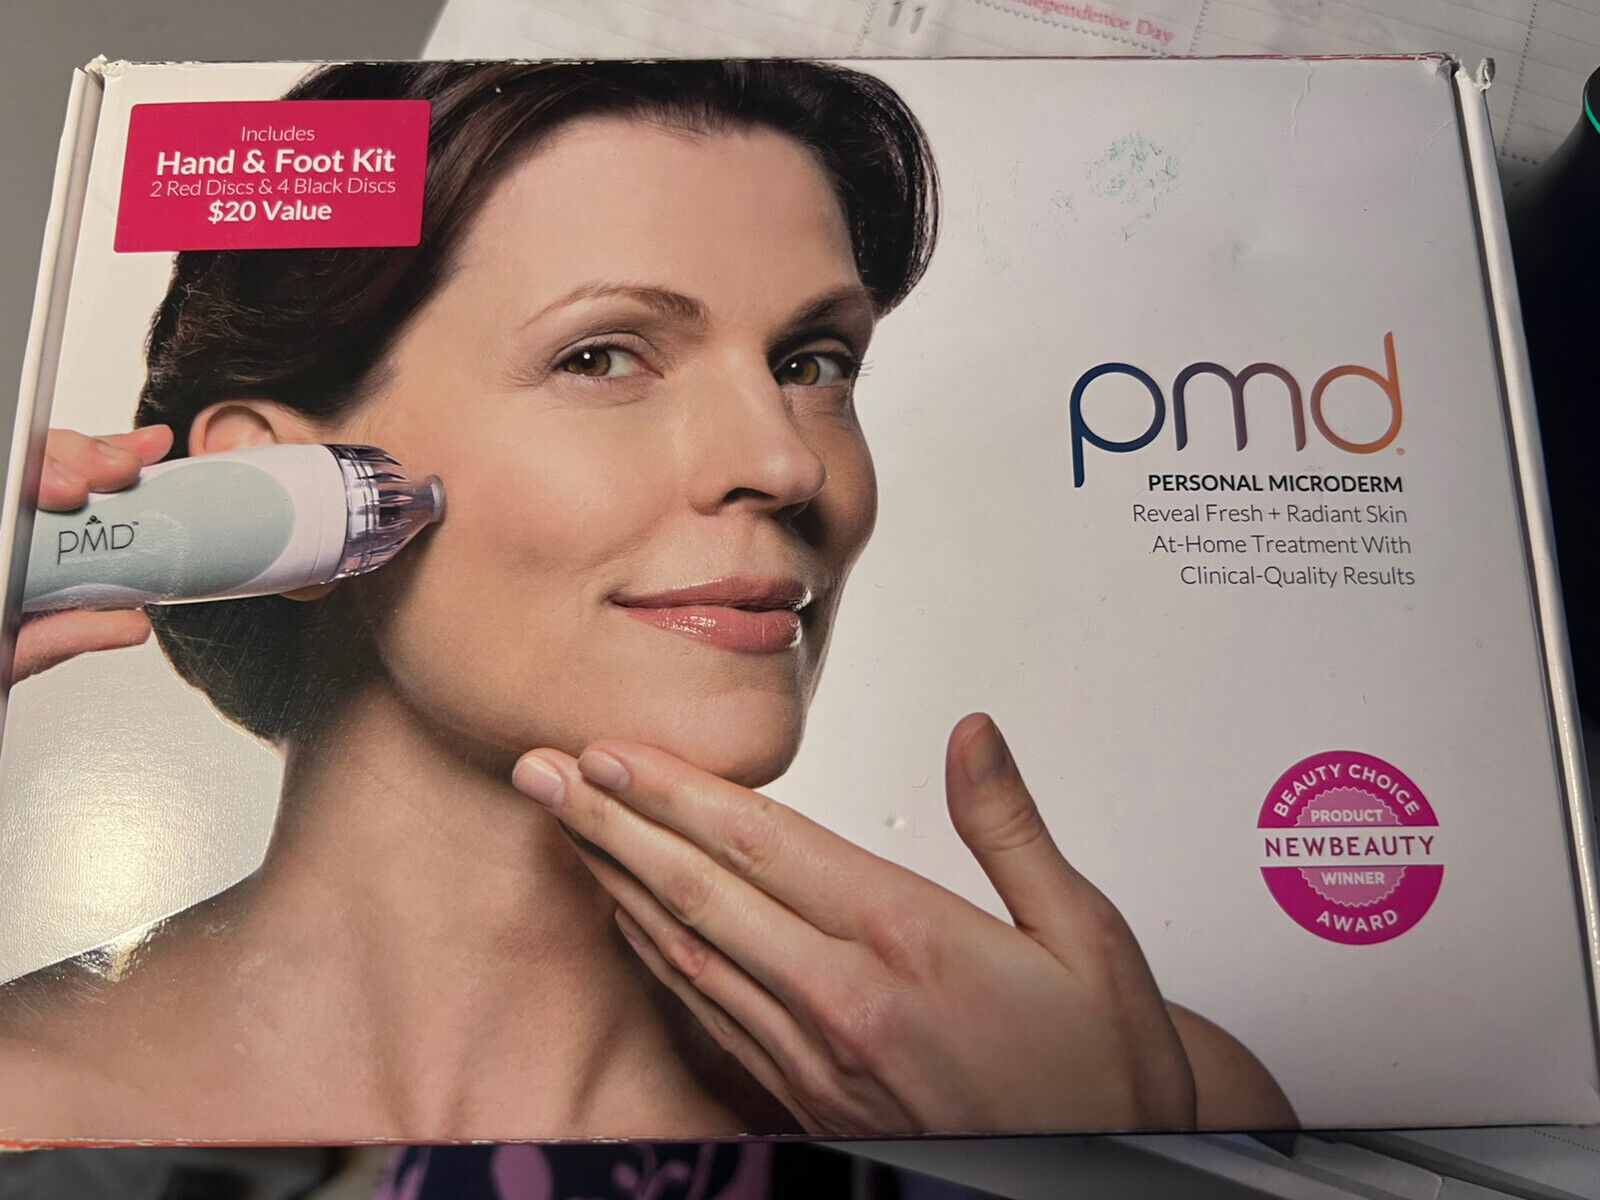 Pmd Personal Microdermabrasion Handheld Open Box Great! Clinal Quality Results!